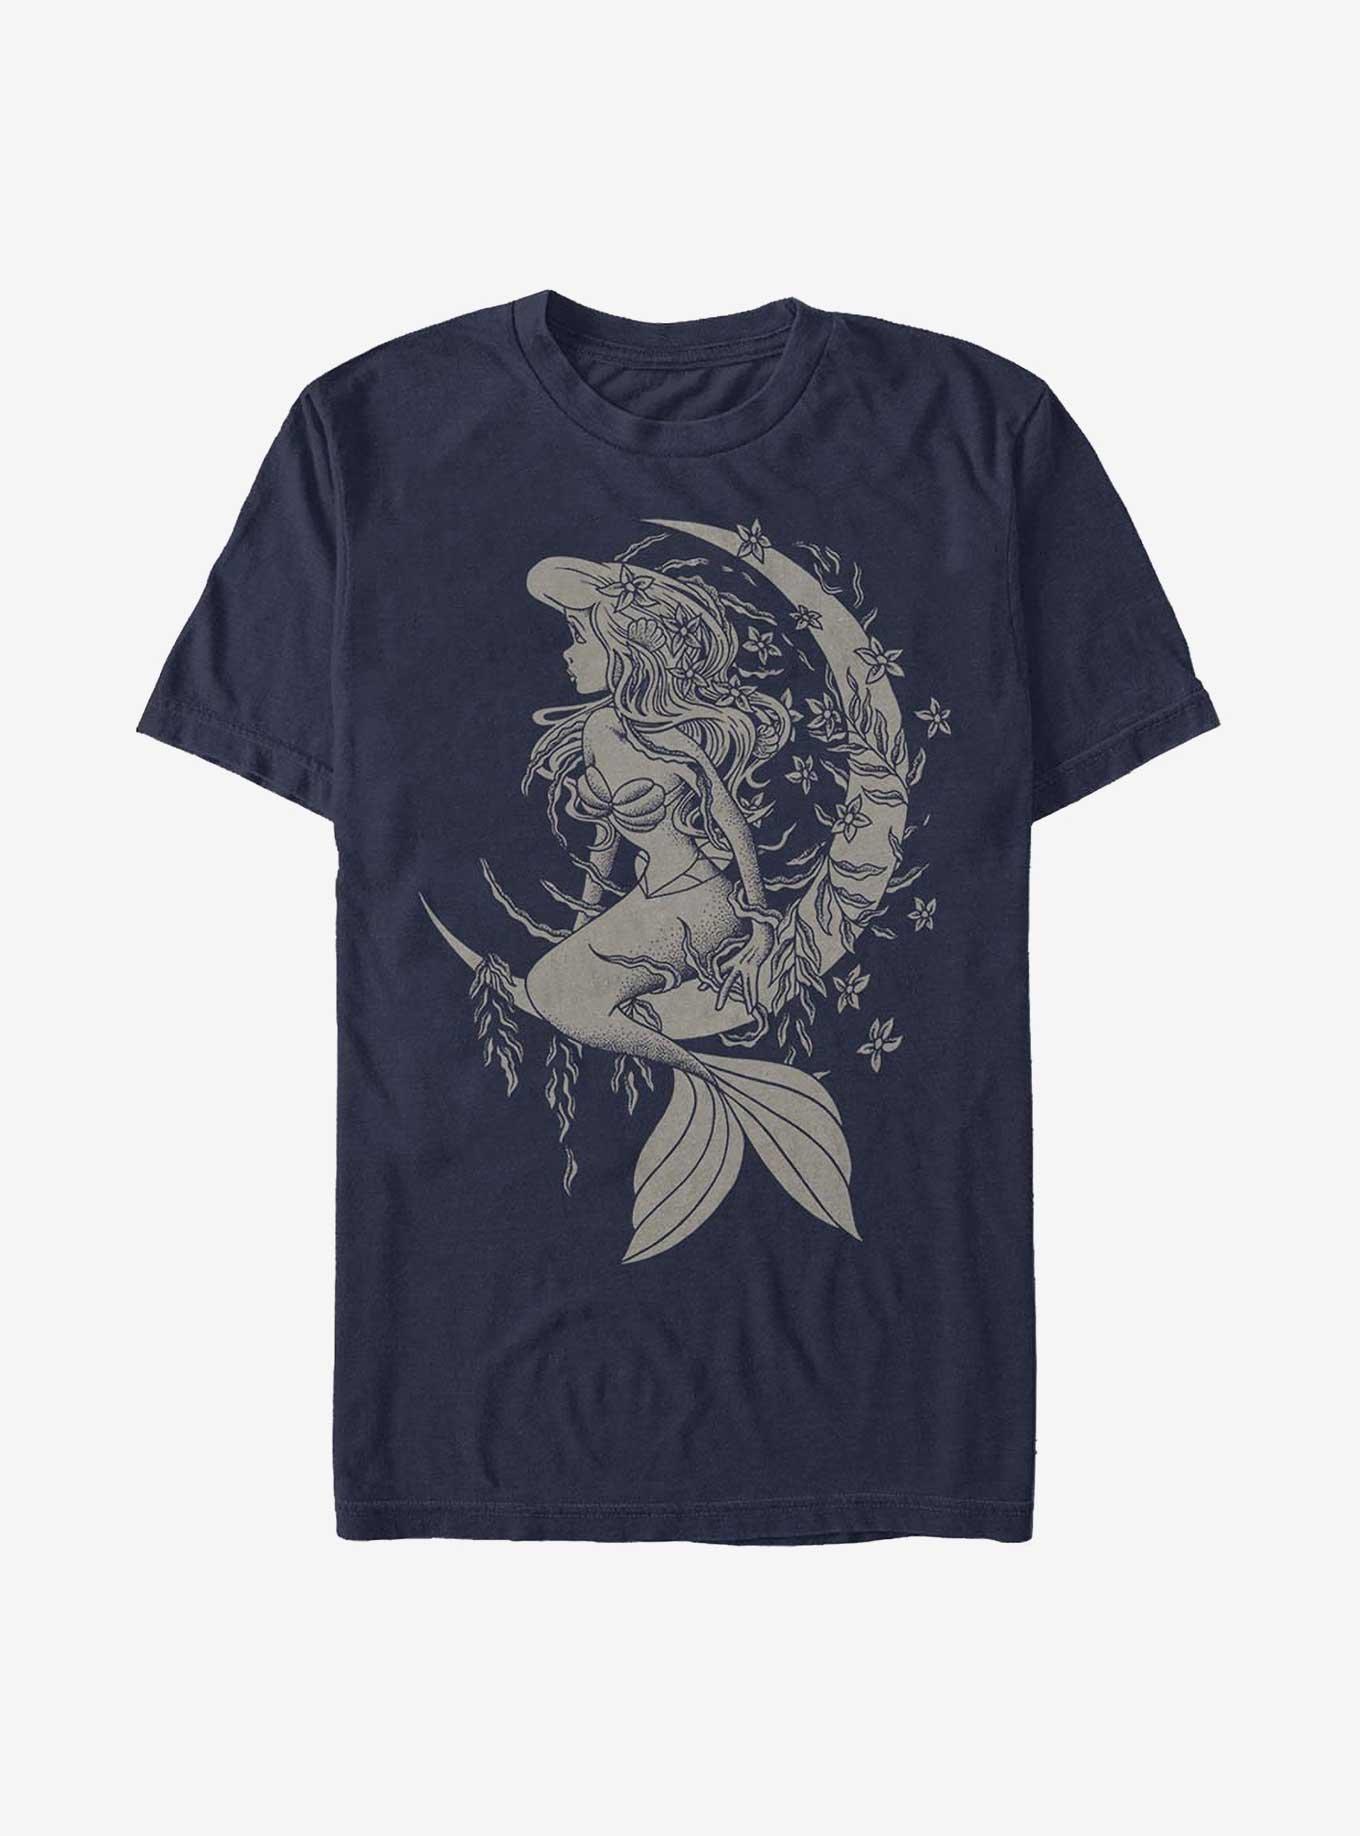 Disney The Little Mermaid Ariel In A Different Space T-Shirt, NAVY, hi-res